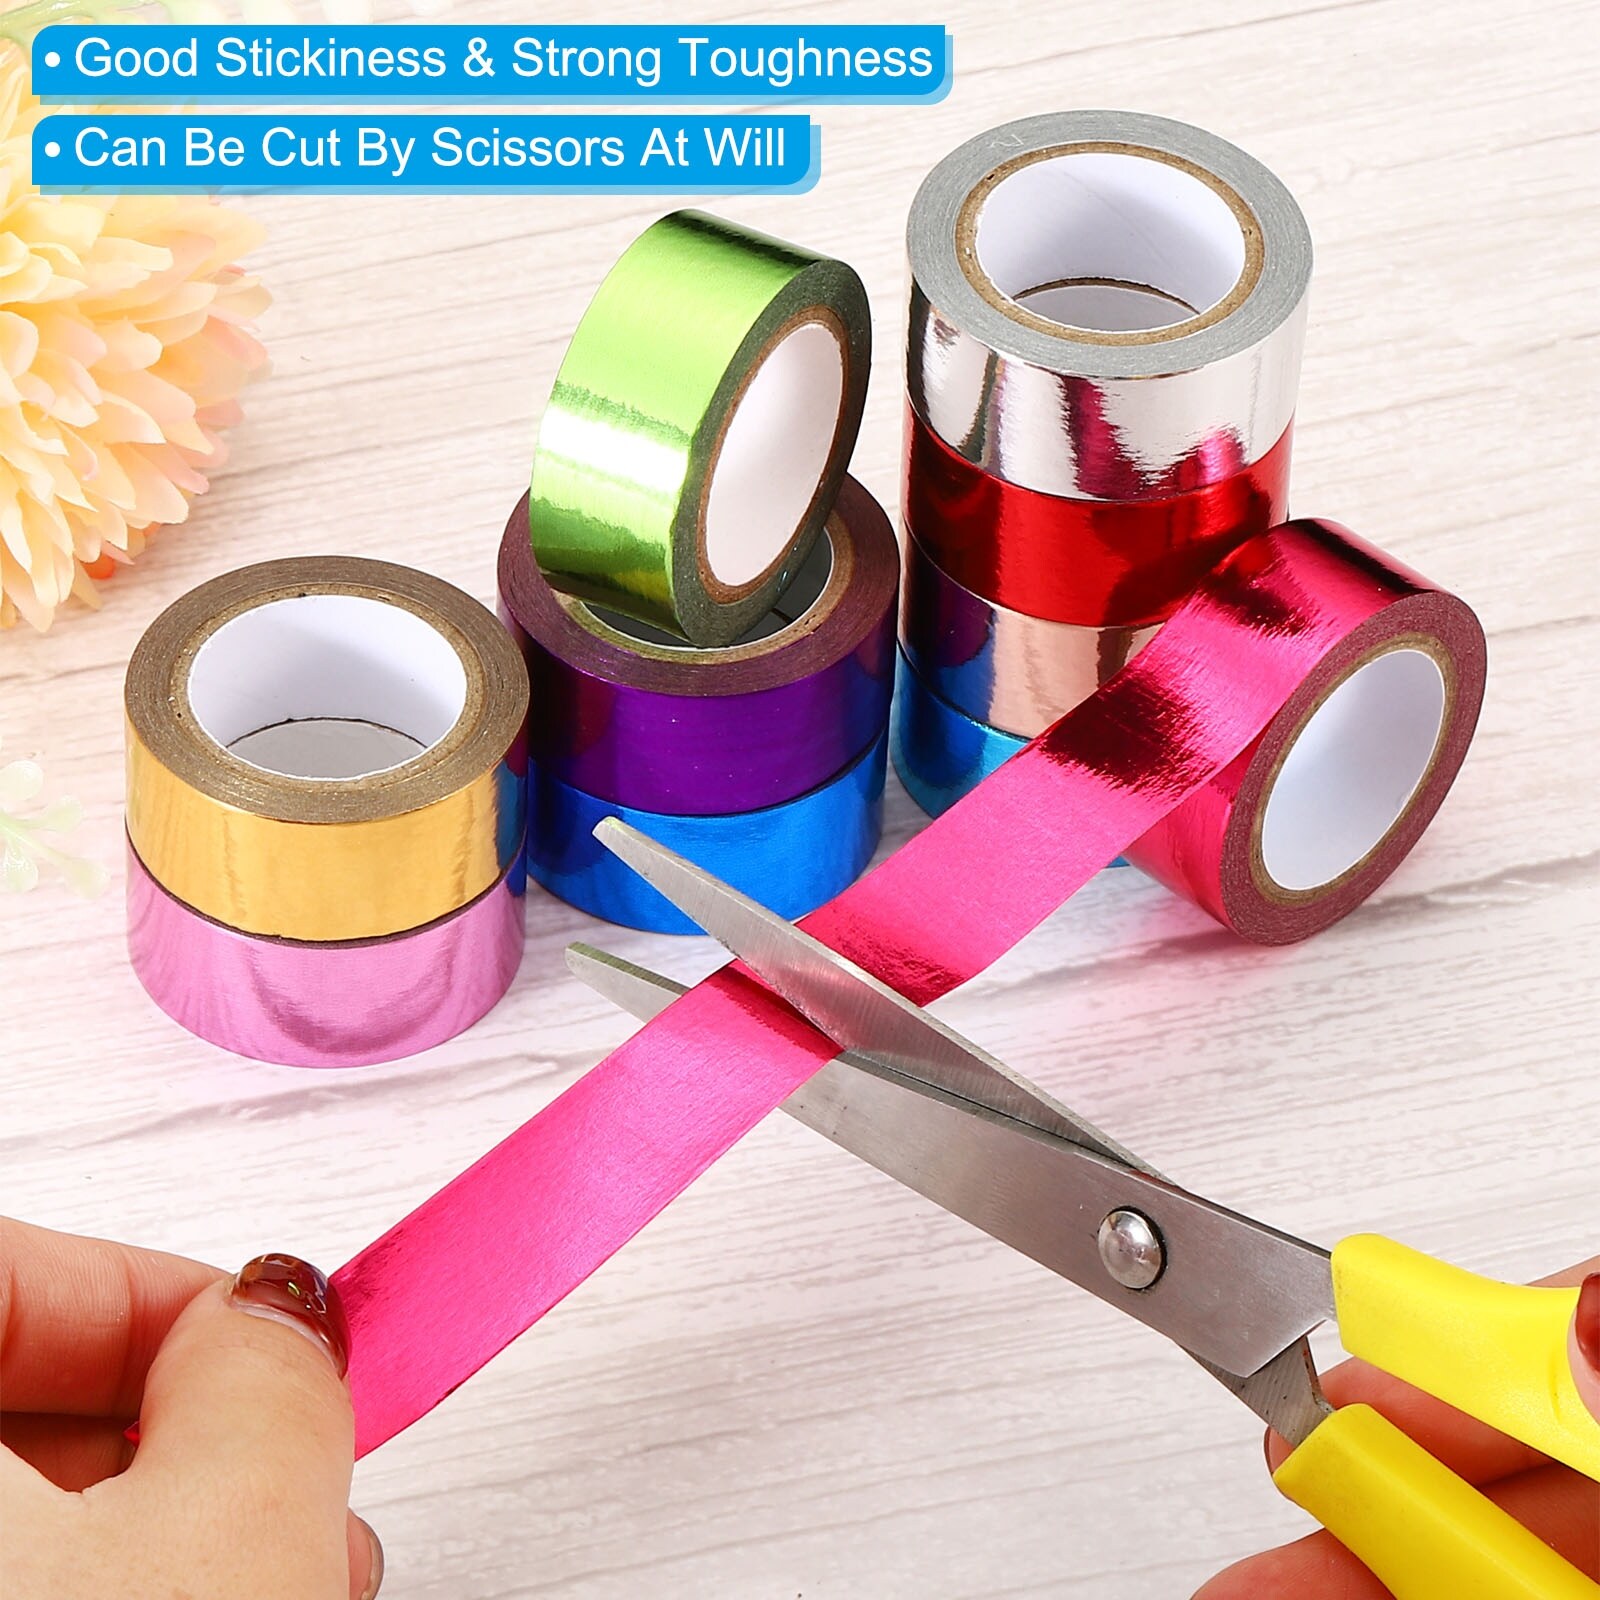 Metallic Washi Tape 15mm x 5m, 6 Pack Art Tapes Washi Self-Adhesive 6  Colors - Multicolor - Bed Bath & Beyond - 37241318